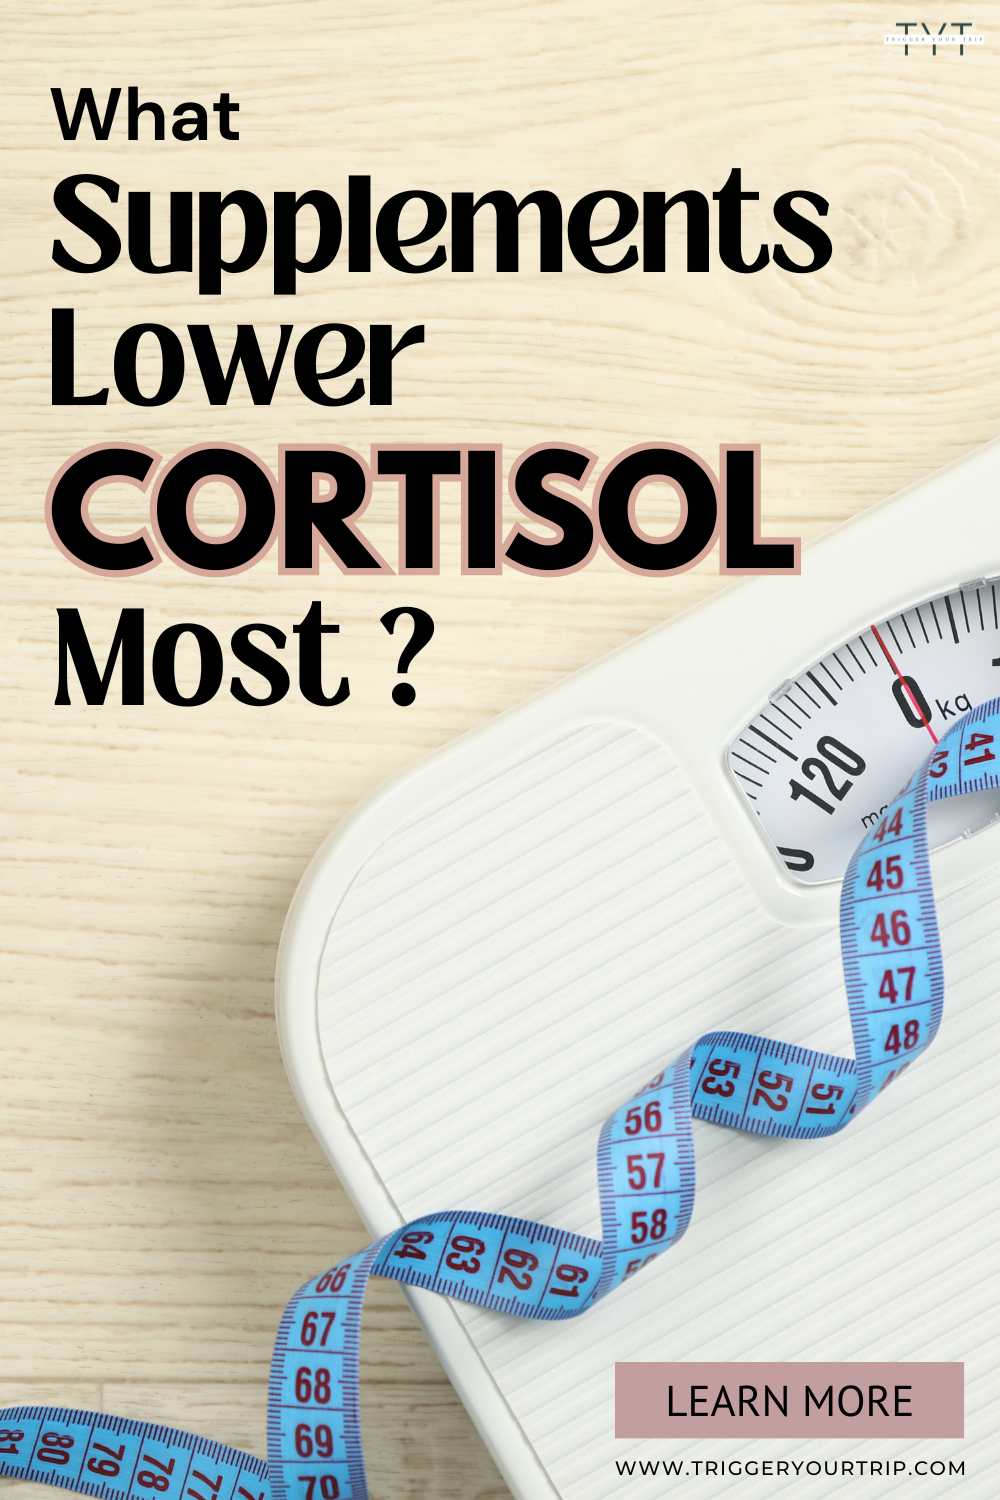 manage stress and manage cortisol levels effectively